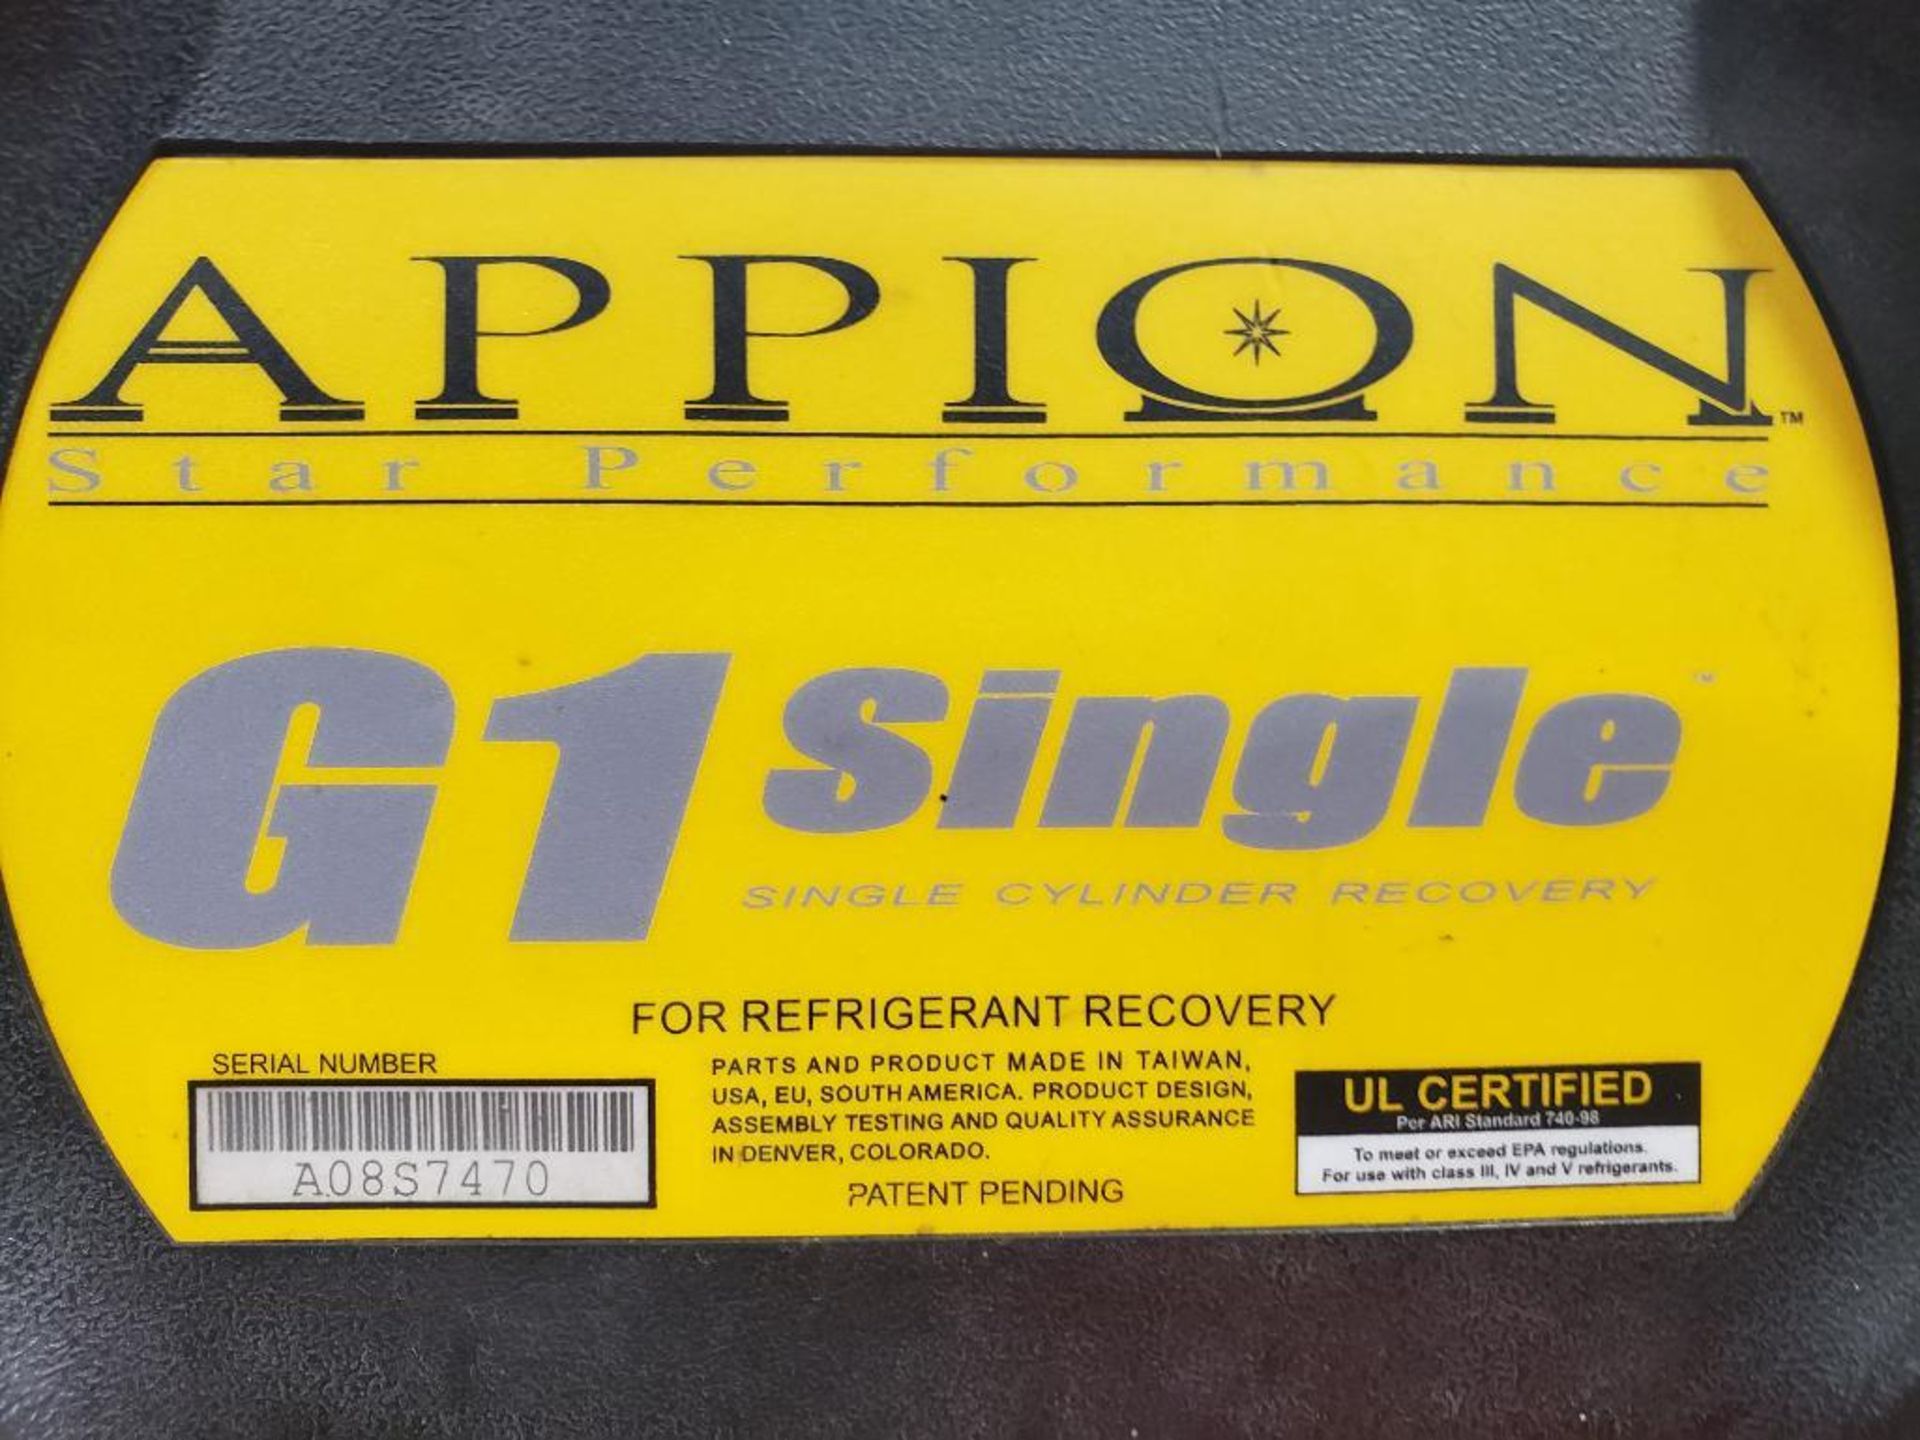 ** Cord cut. Parts repairable** Appion G1 Single refrigerator recovery machine. . - Image 4 of 8